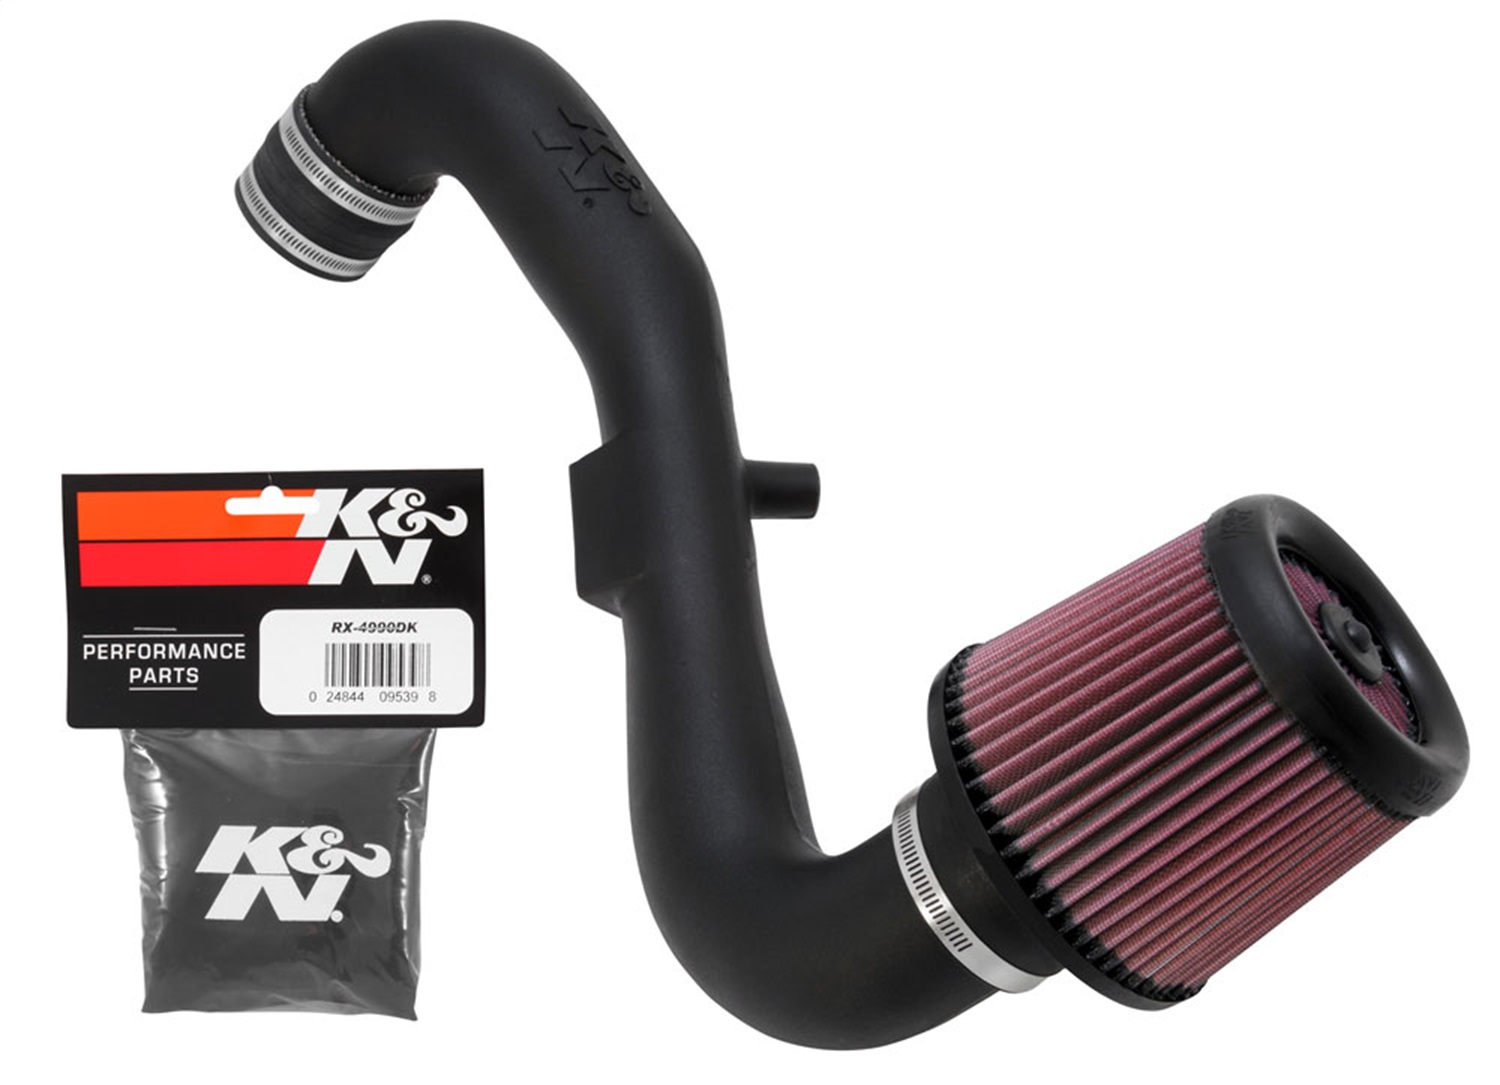 K&N Filters K&N Filters 57-2559 Filtercharger Injection Performance Kit Fits 05 Focus